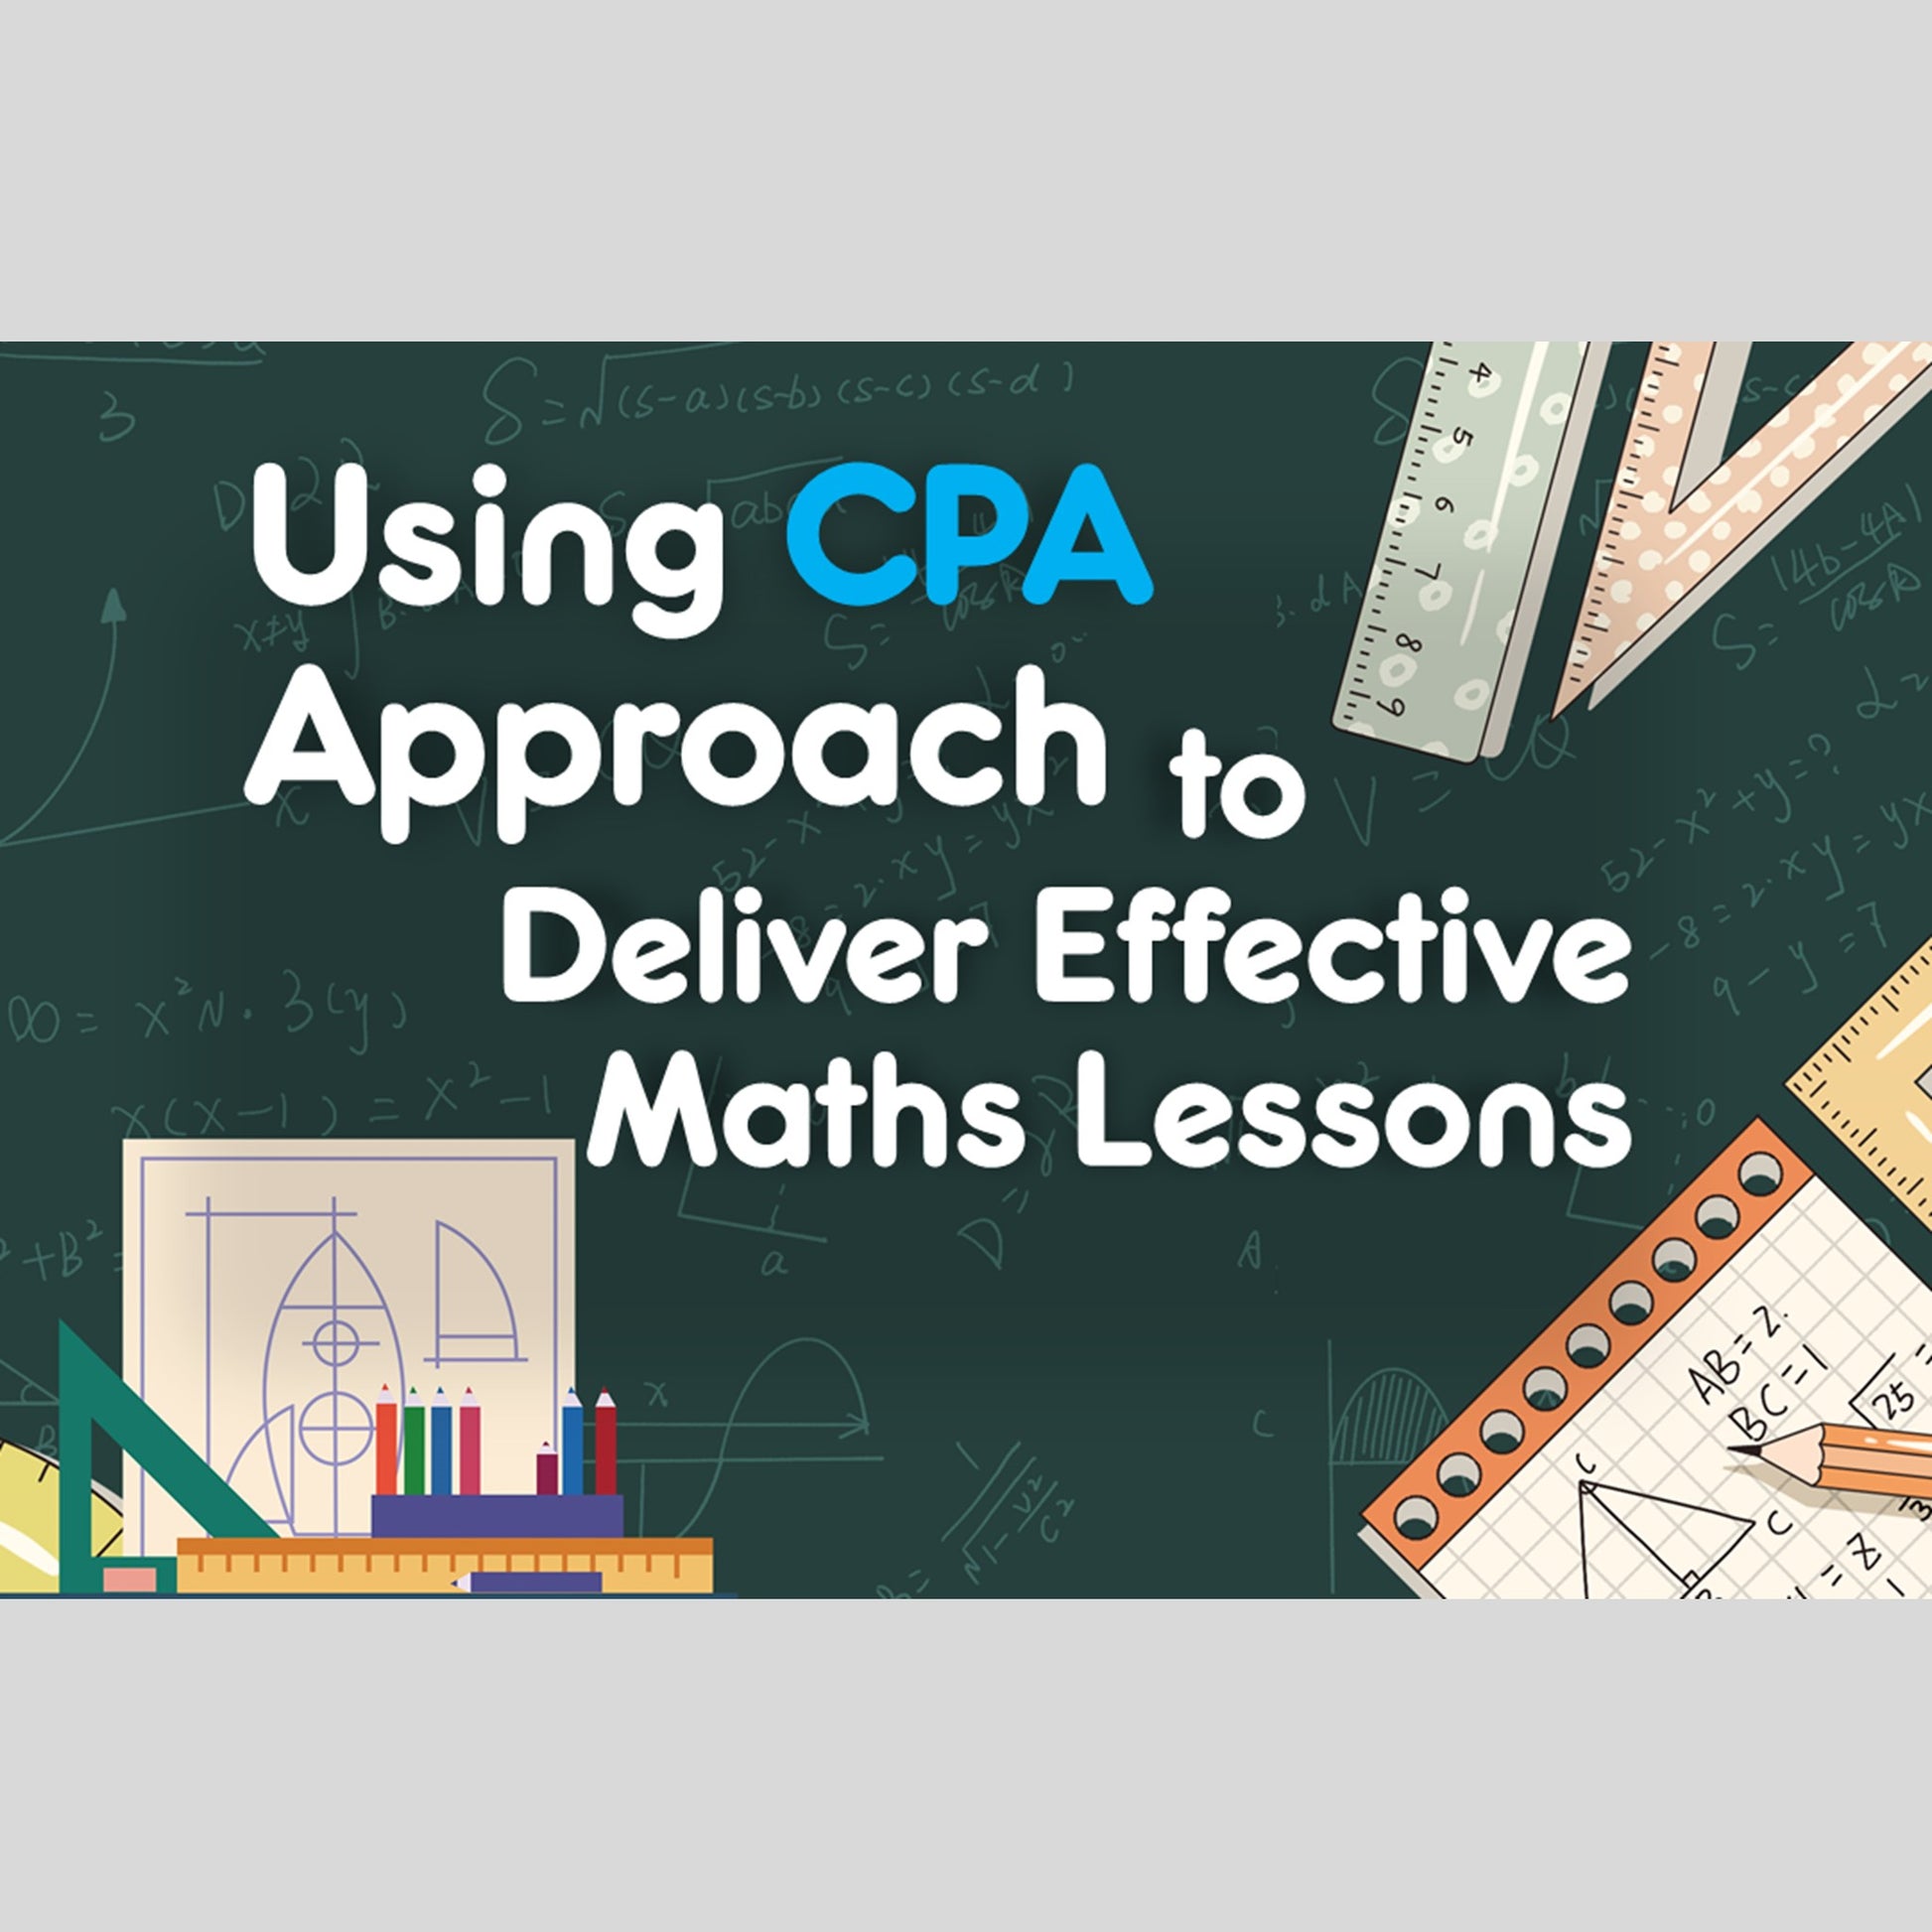 Using CPA Approach to Deliver Effective Maths Lessons